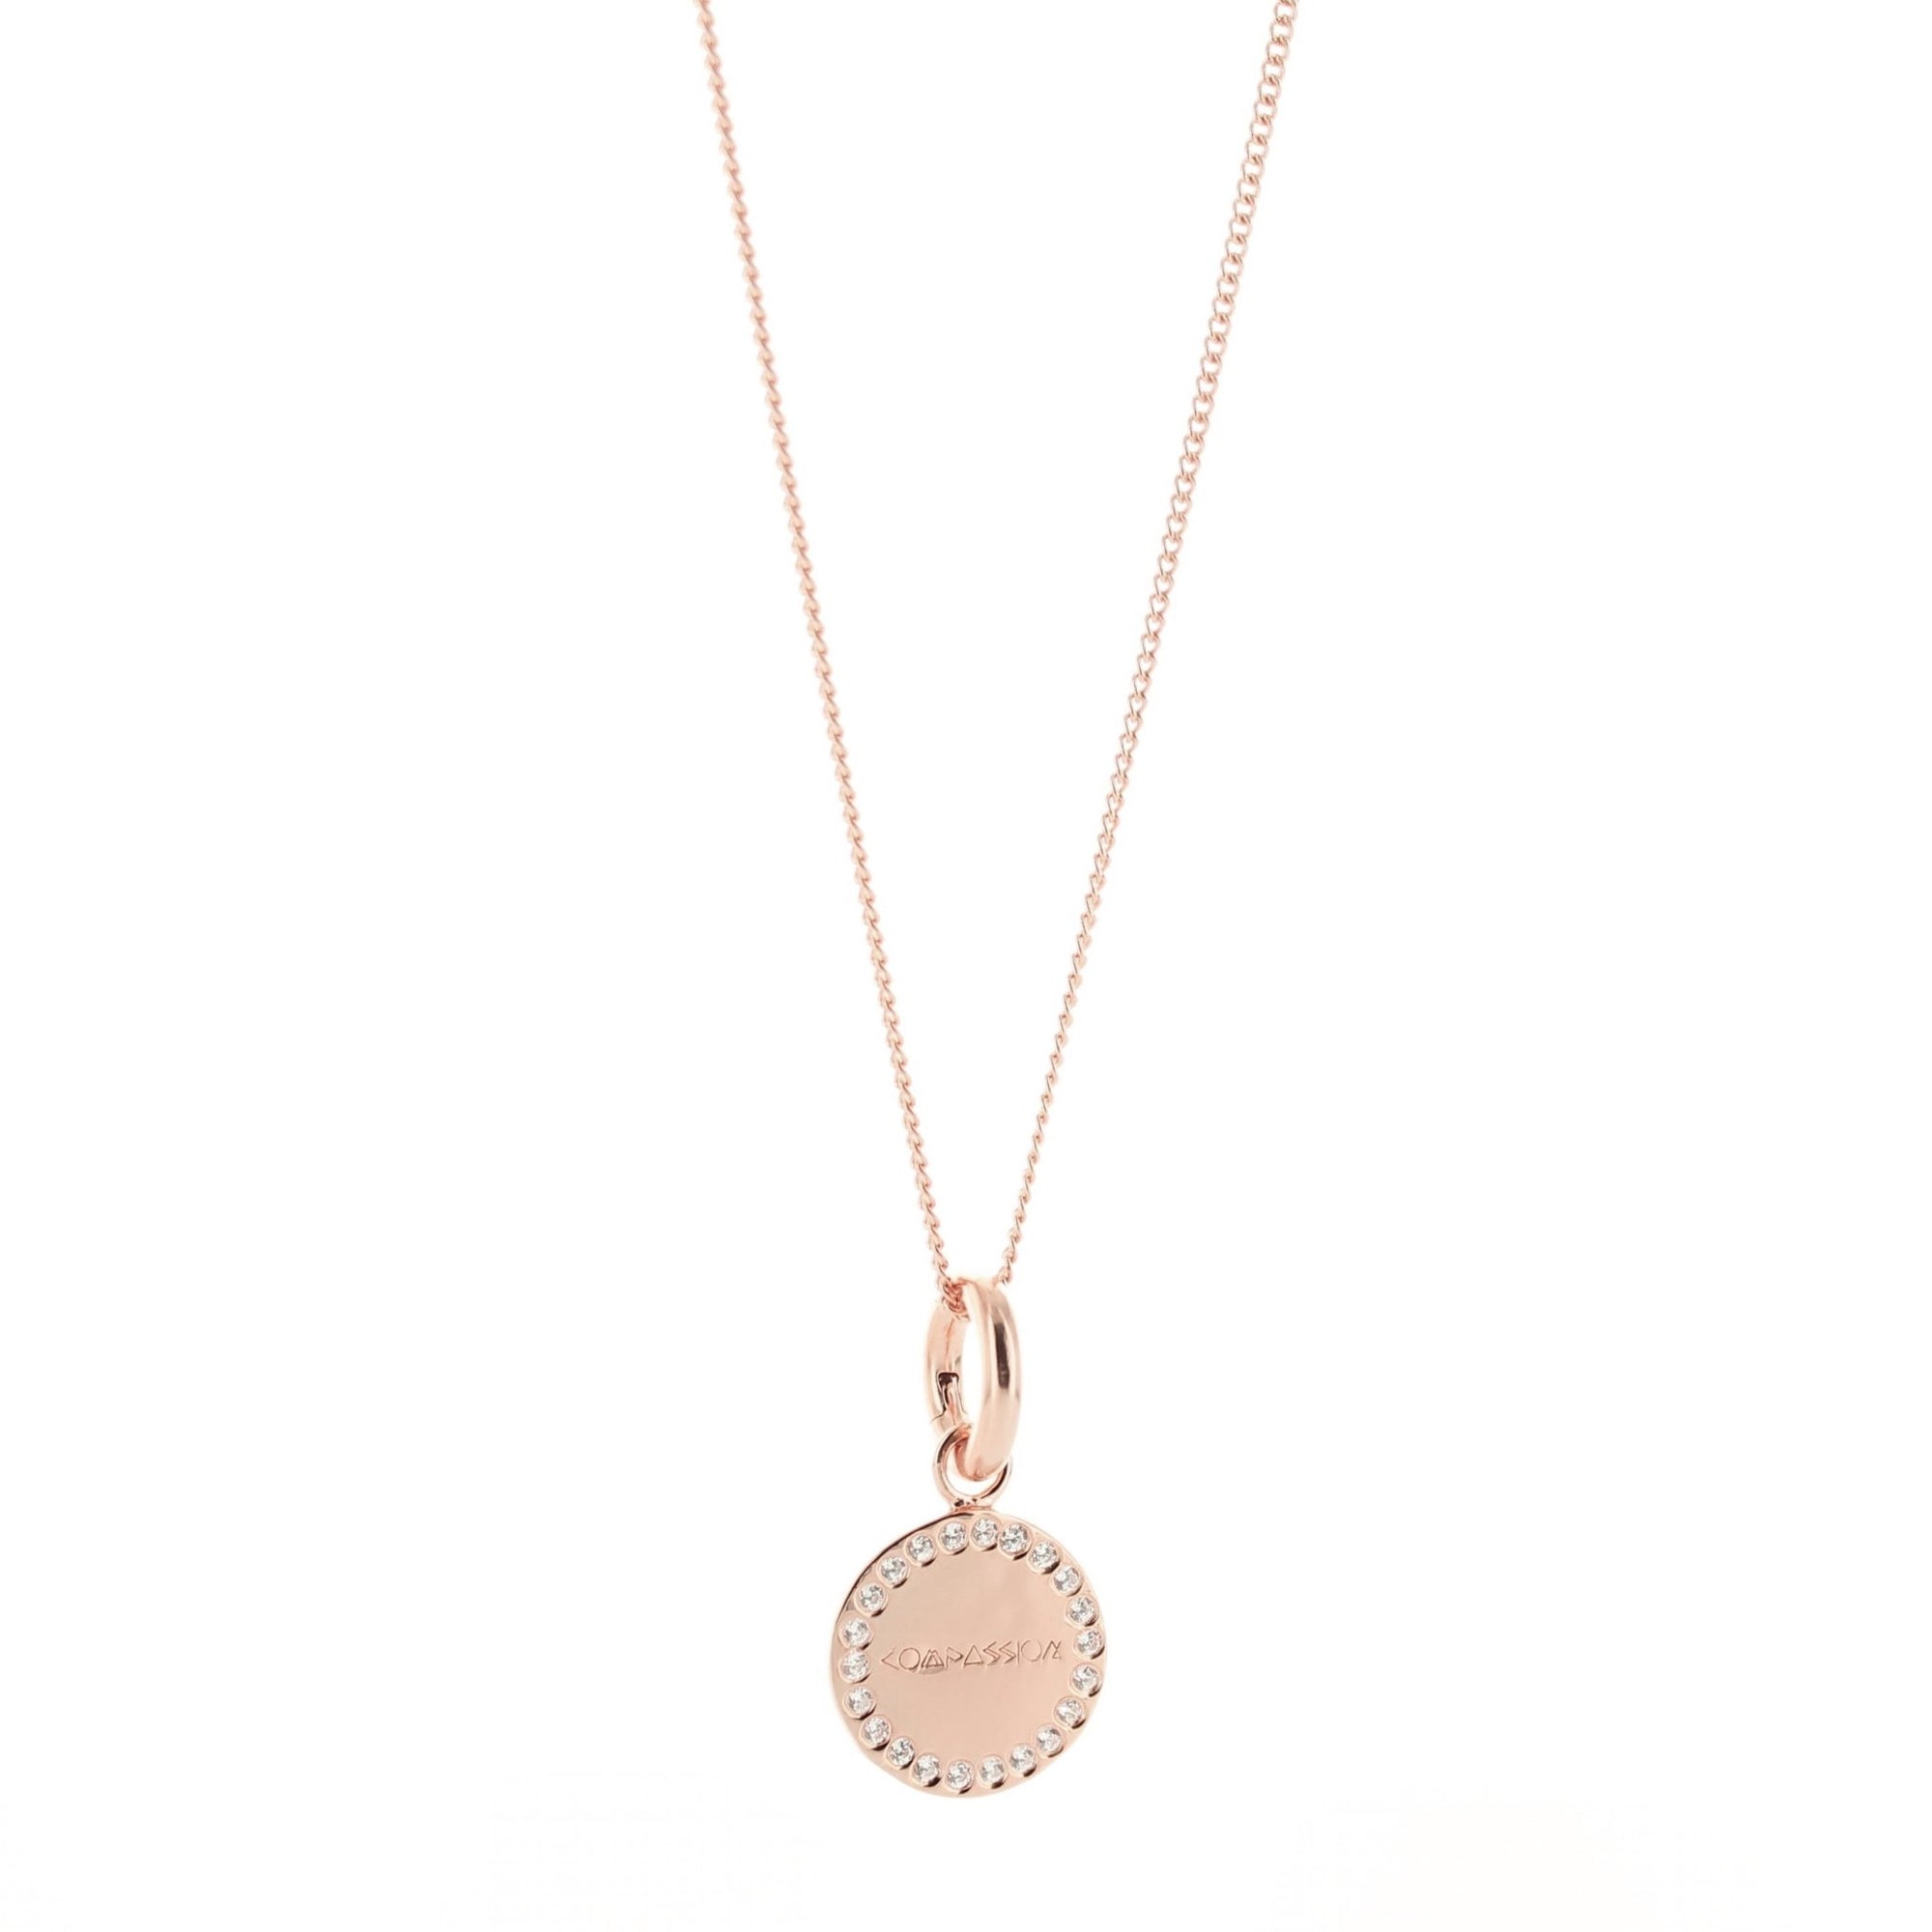 COMPASSION FLOATING CHARM PENDANT CUBIC ZIRCONIA ROSE GOLD - SO PRETTY CARA COTTER